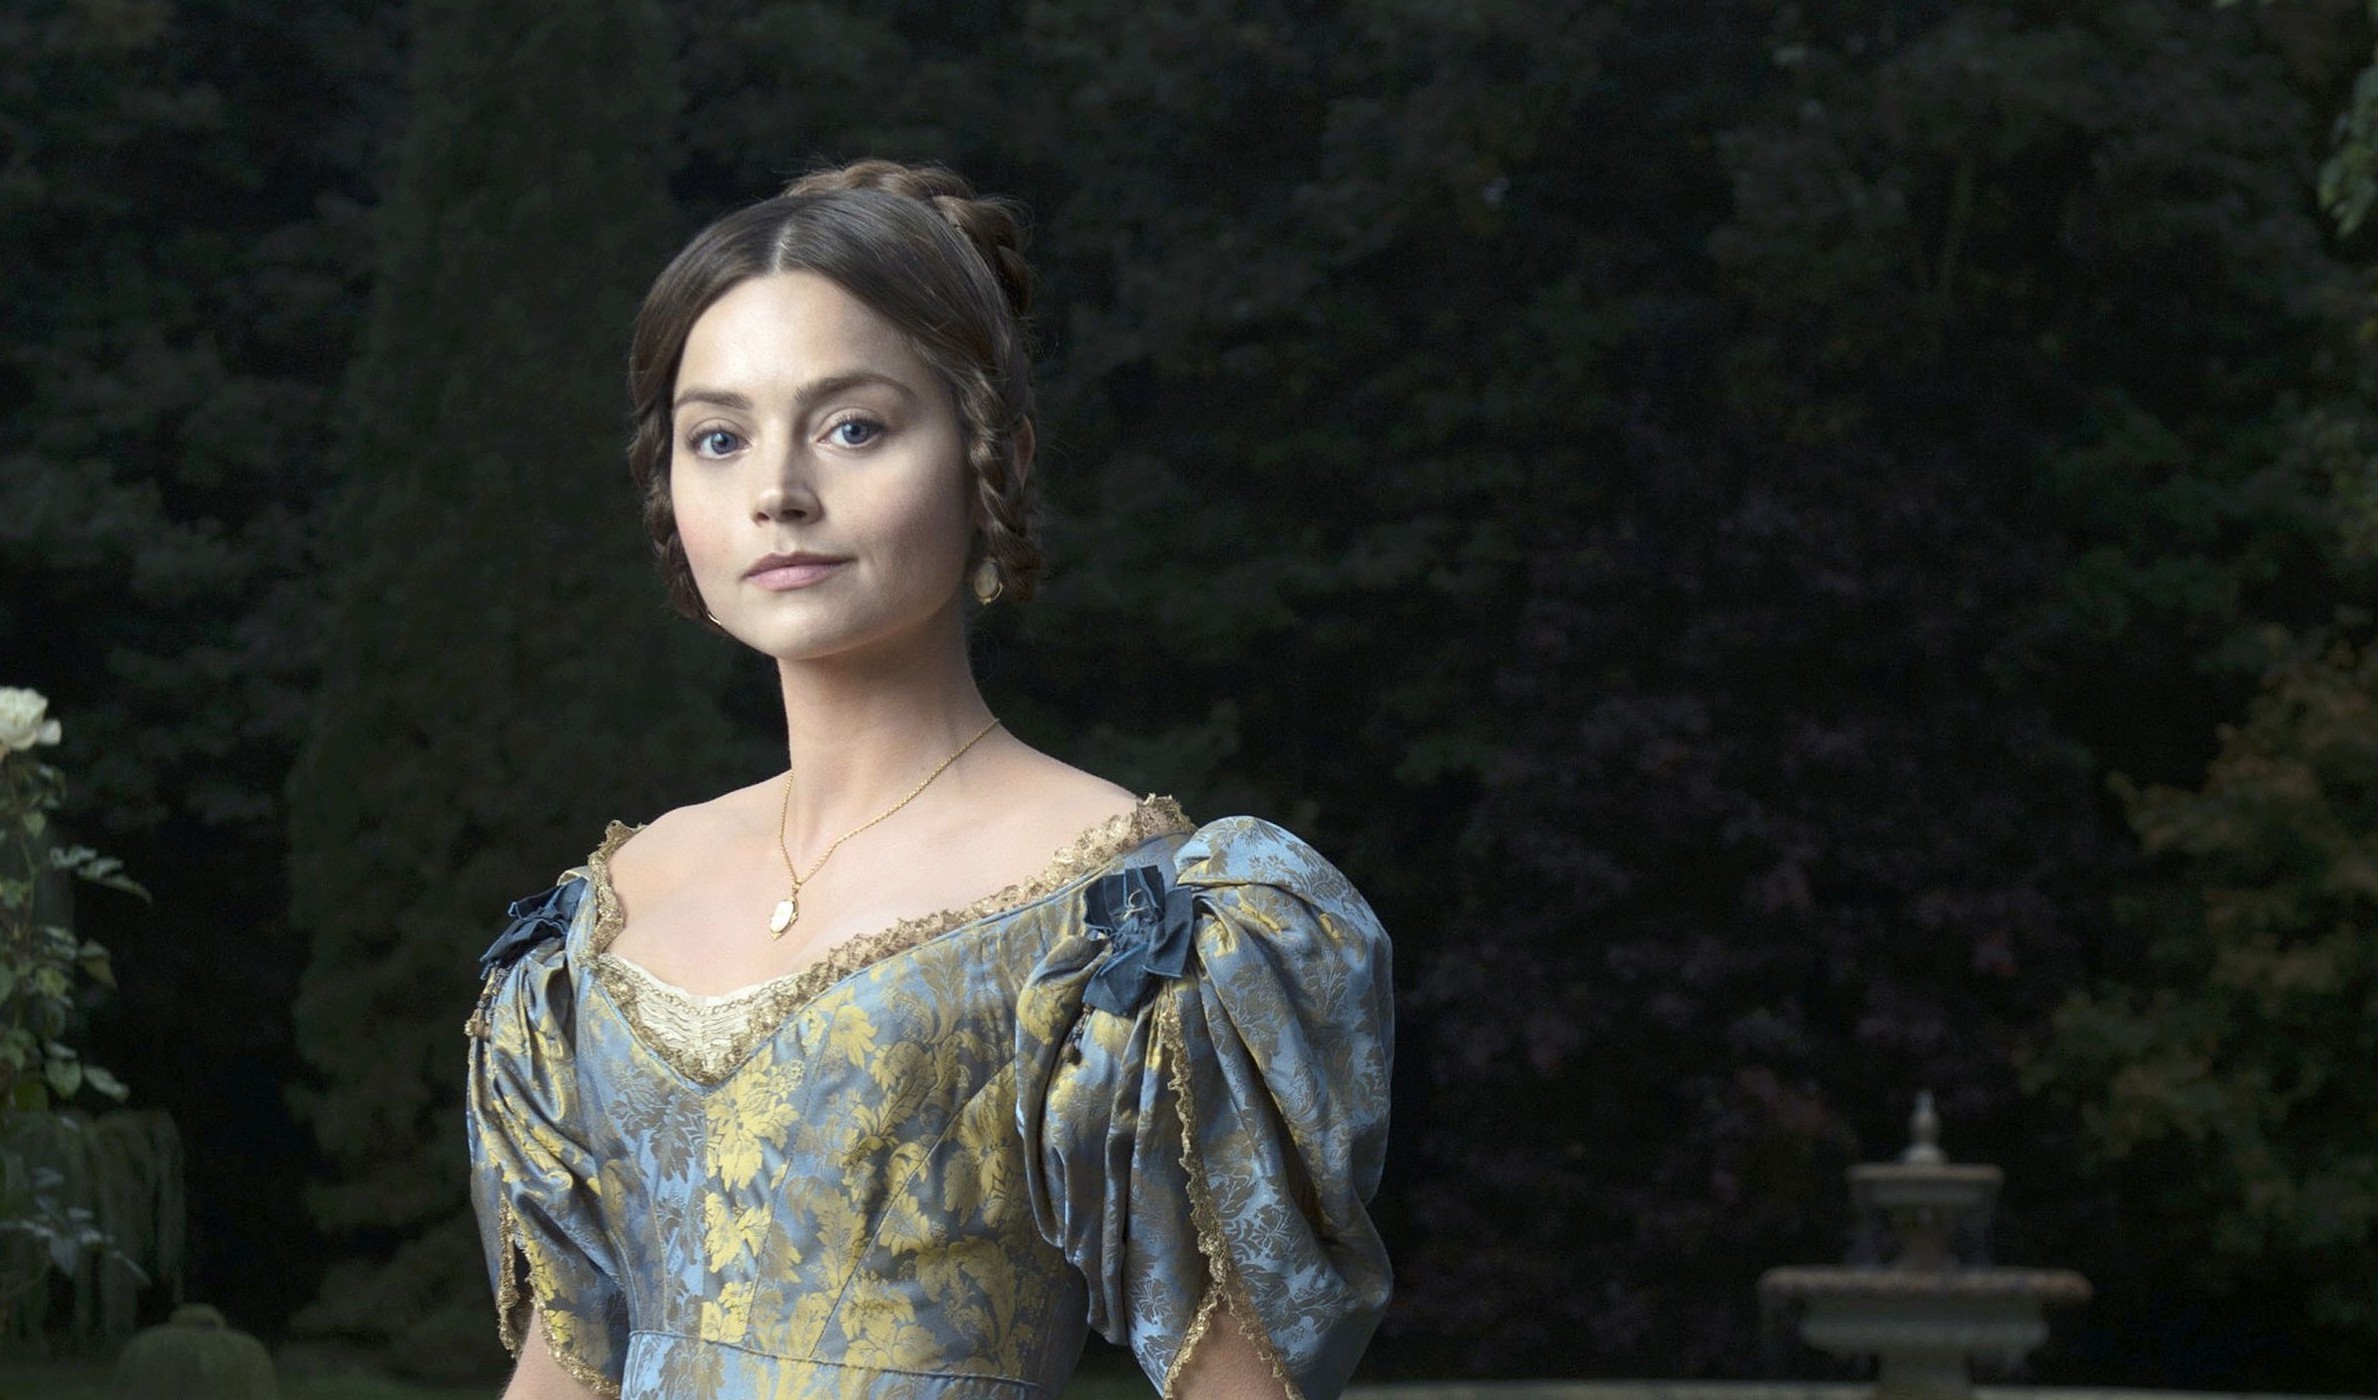 Jenna Coleman as Queen Victoria in ITV's new drama series